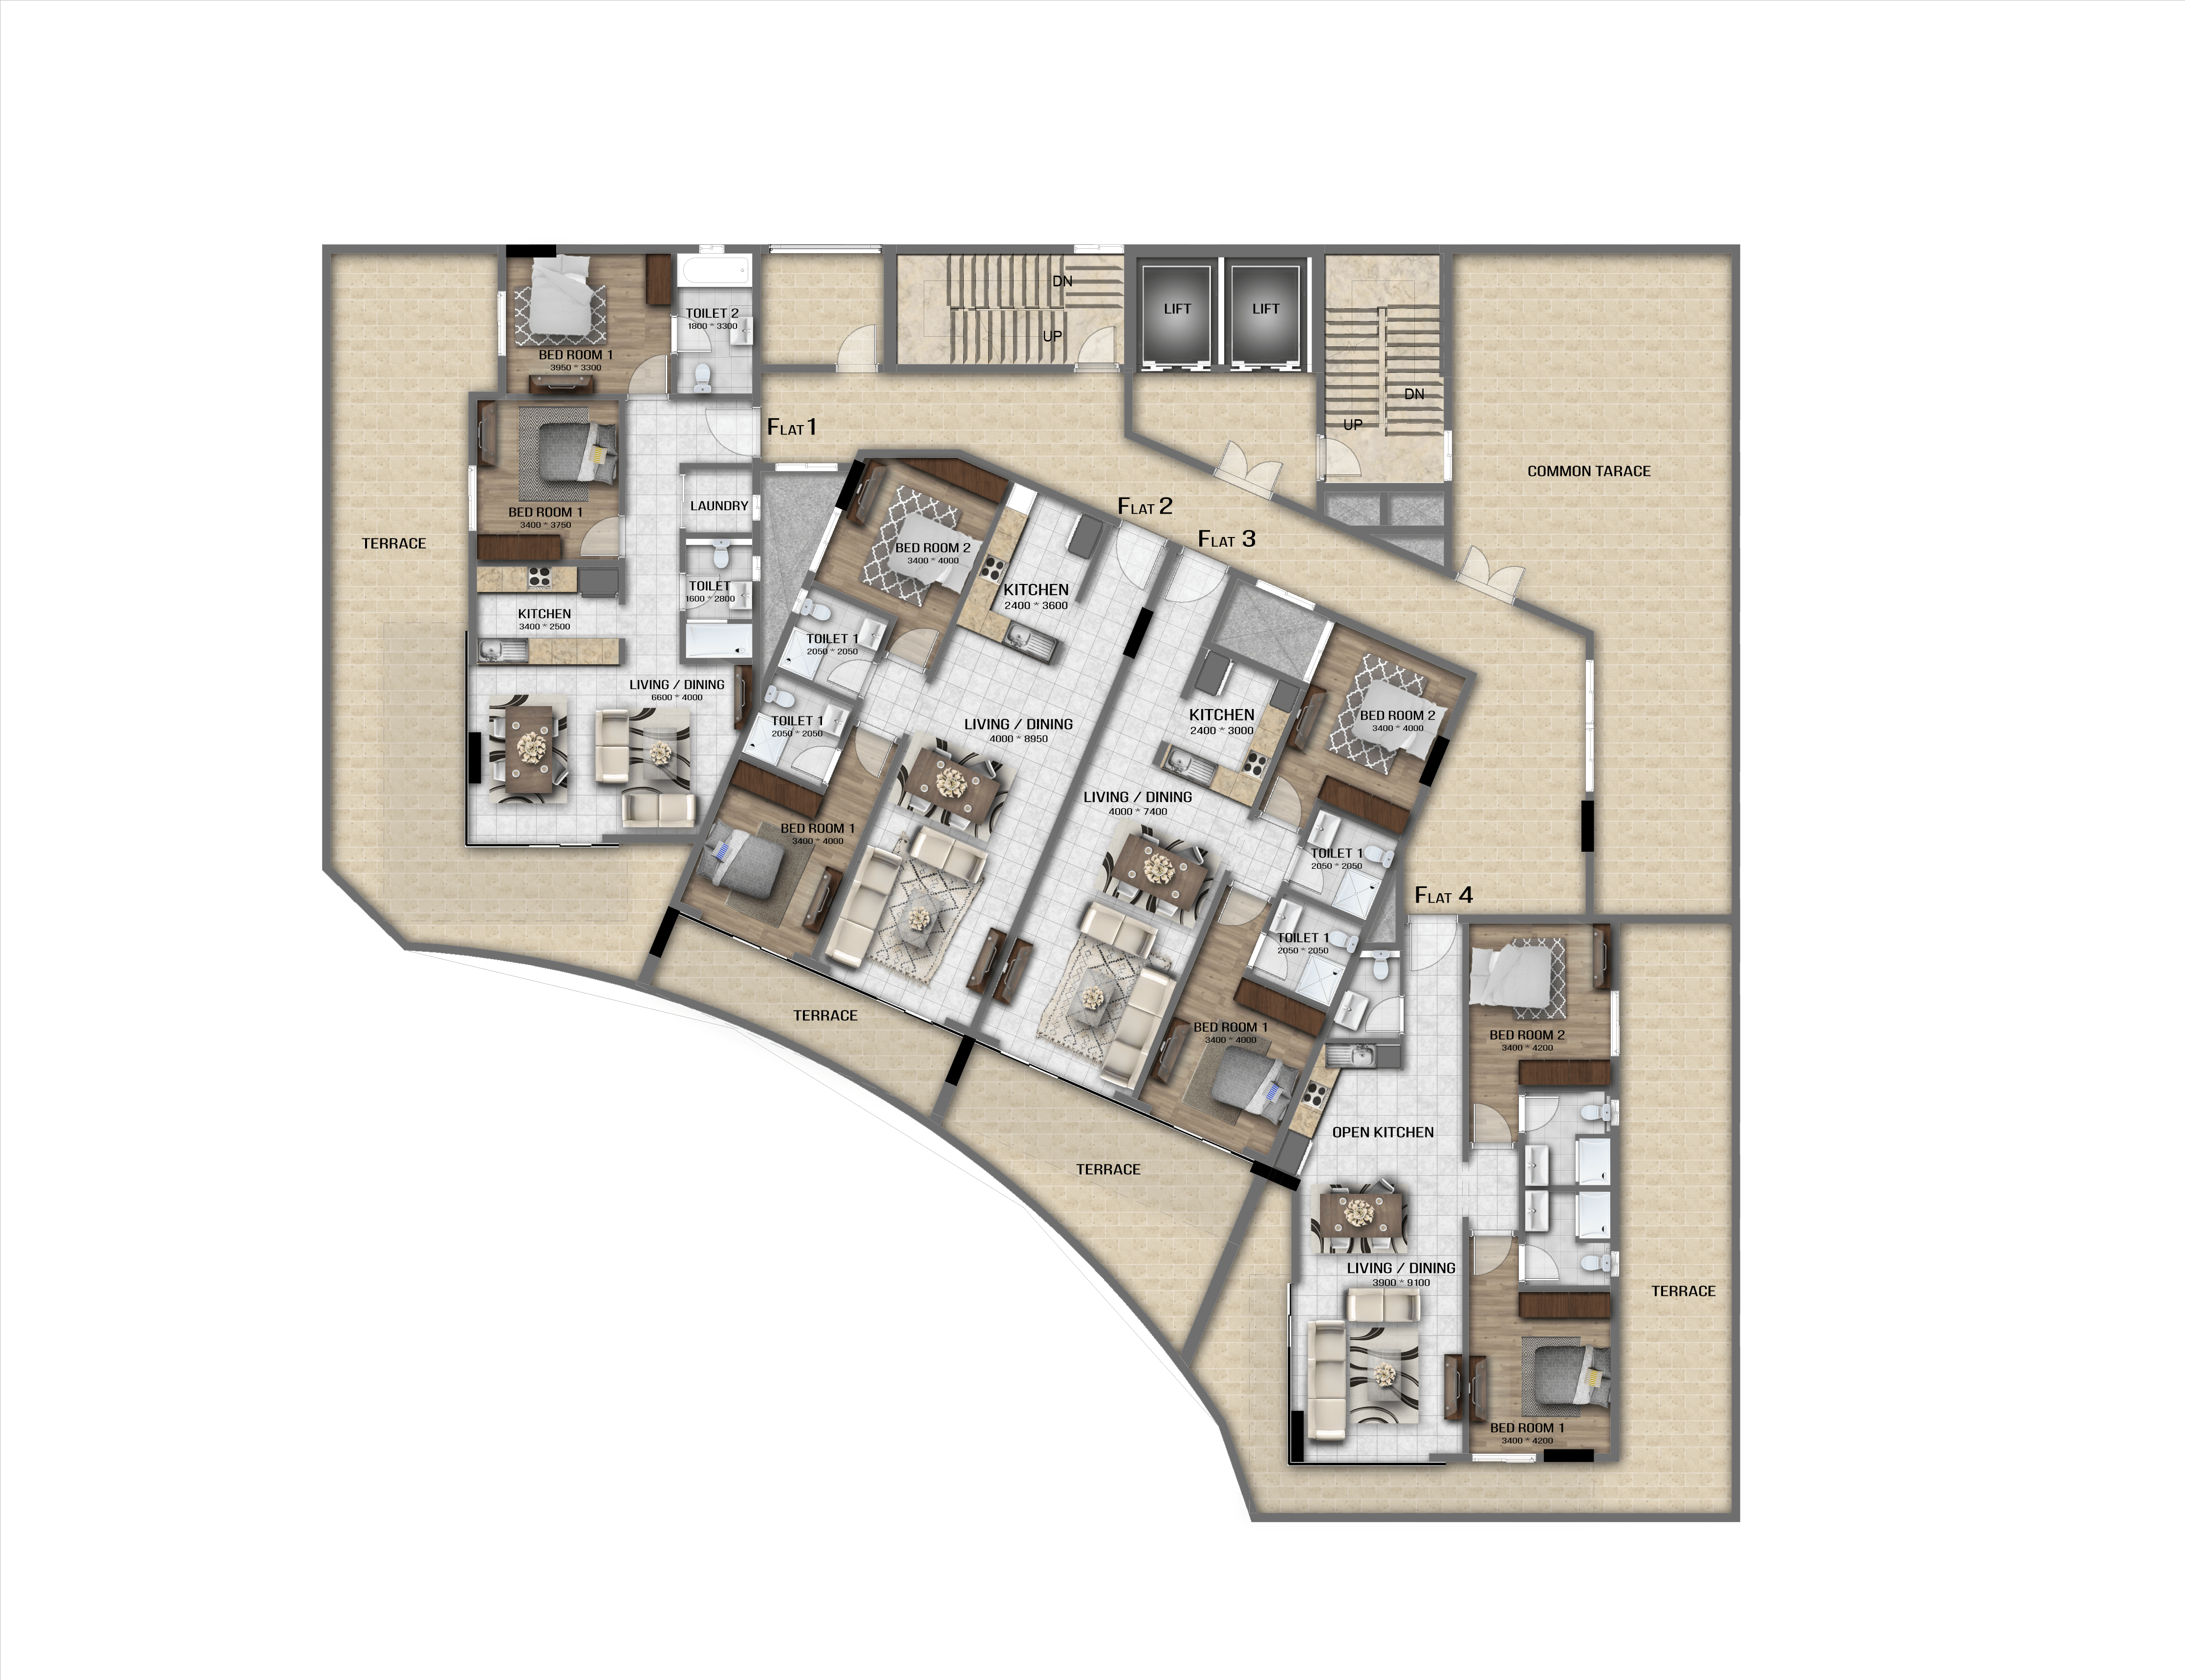 A floor plan of an apartment with two bedrooms and two bathrooms in the Dar 2 building.